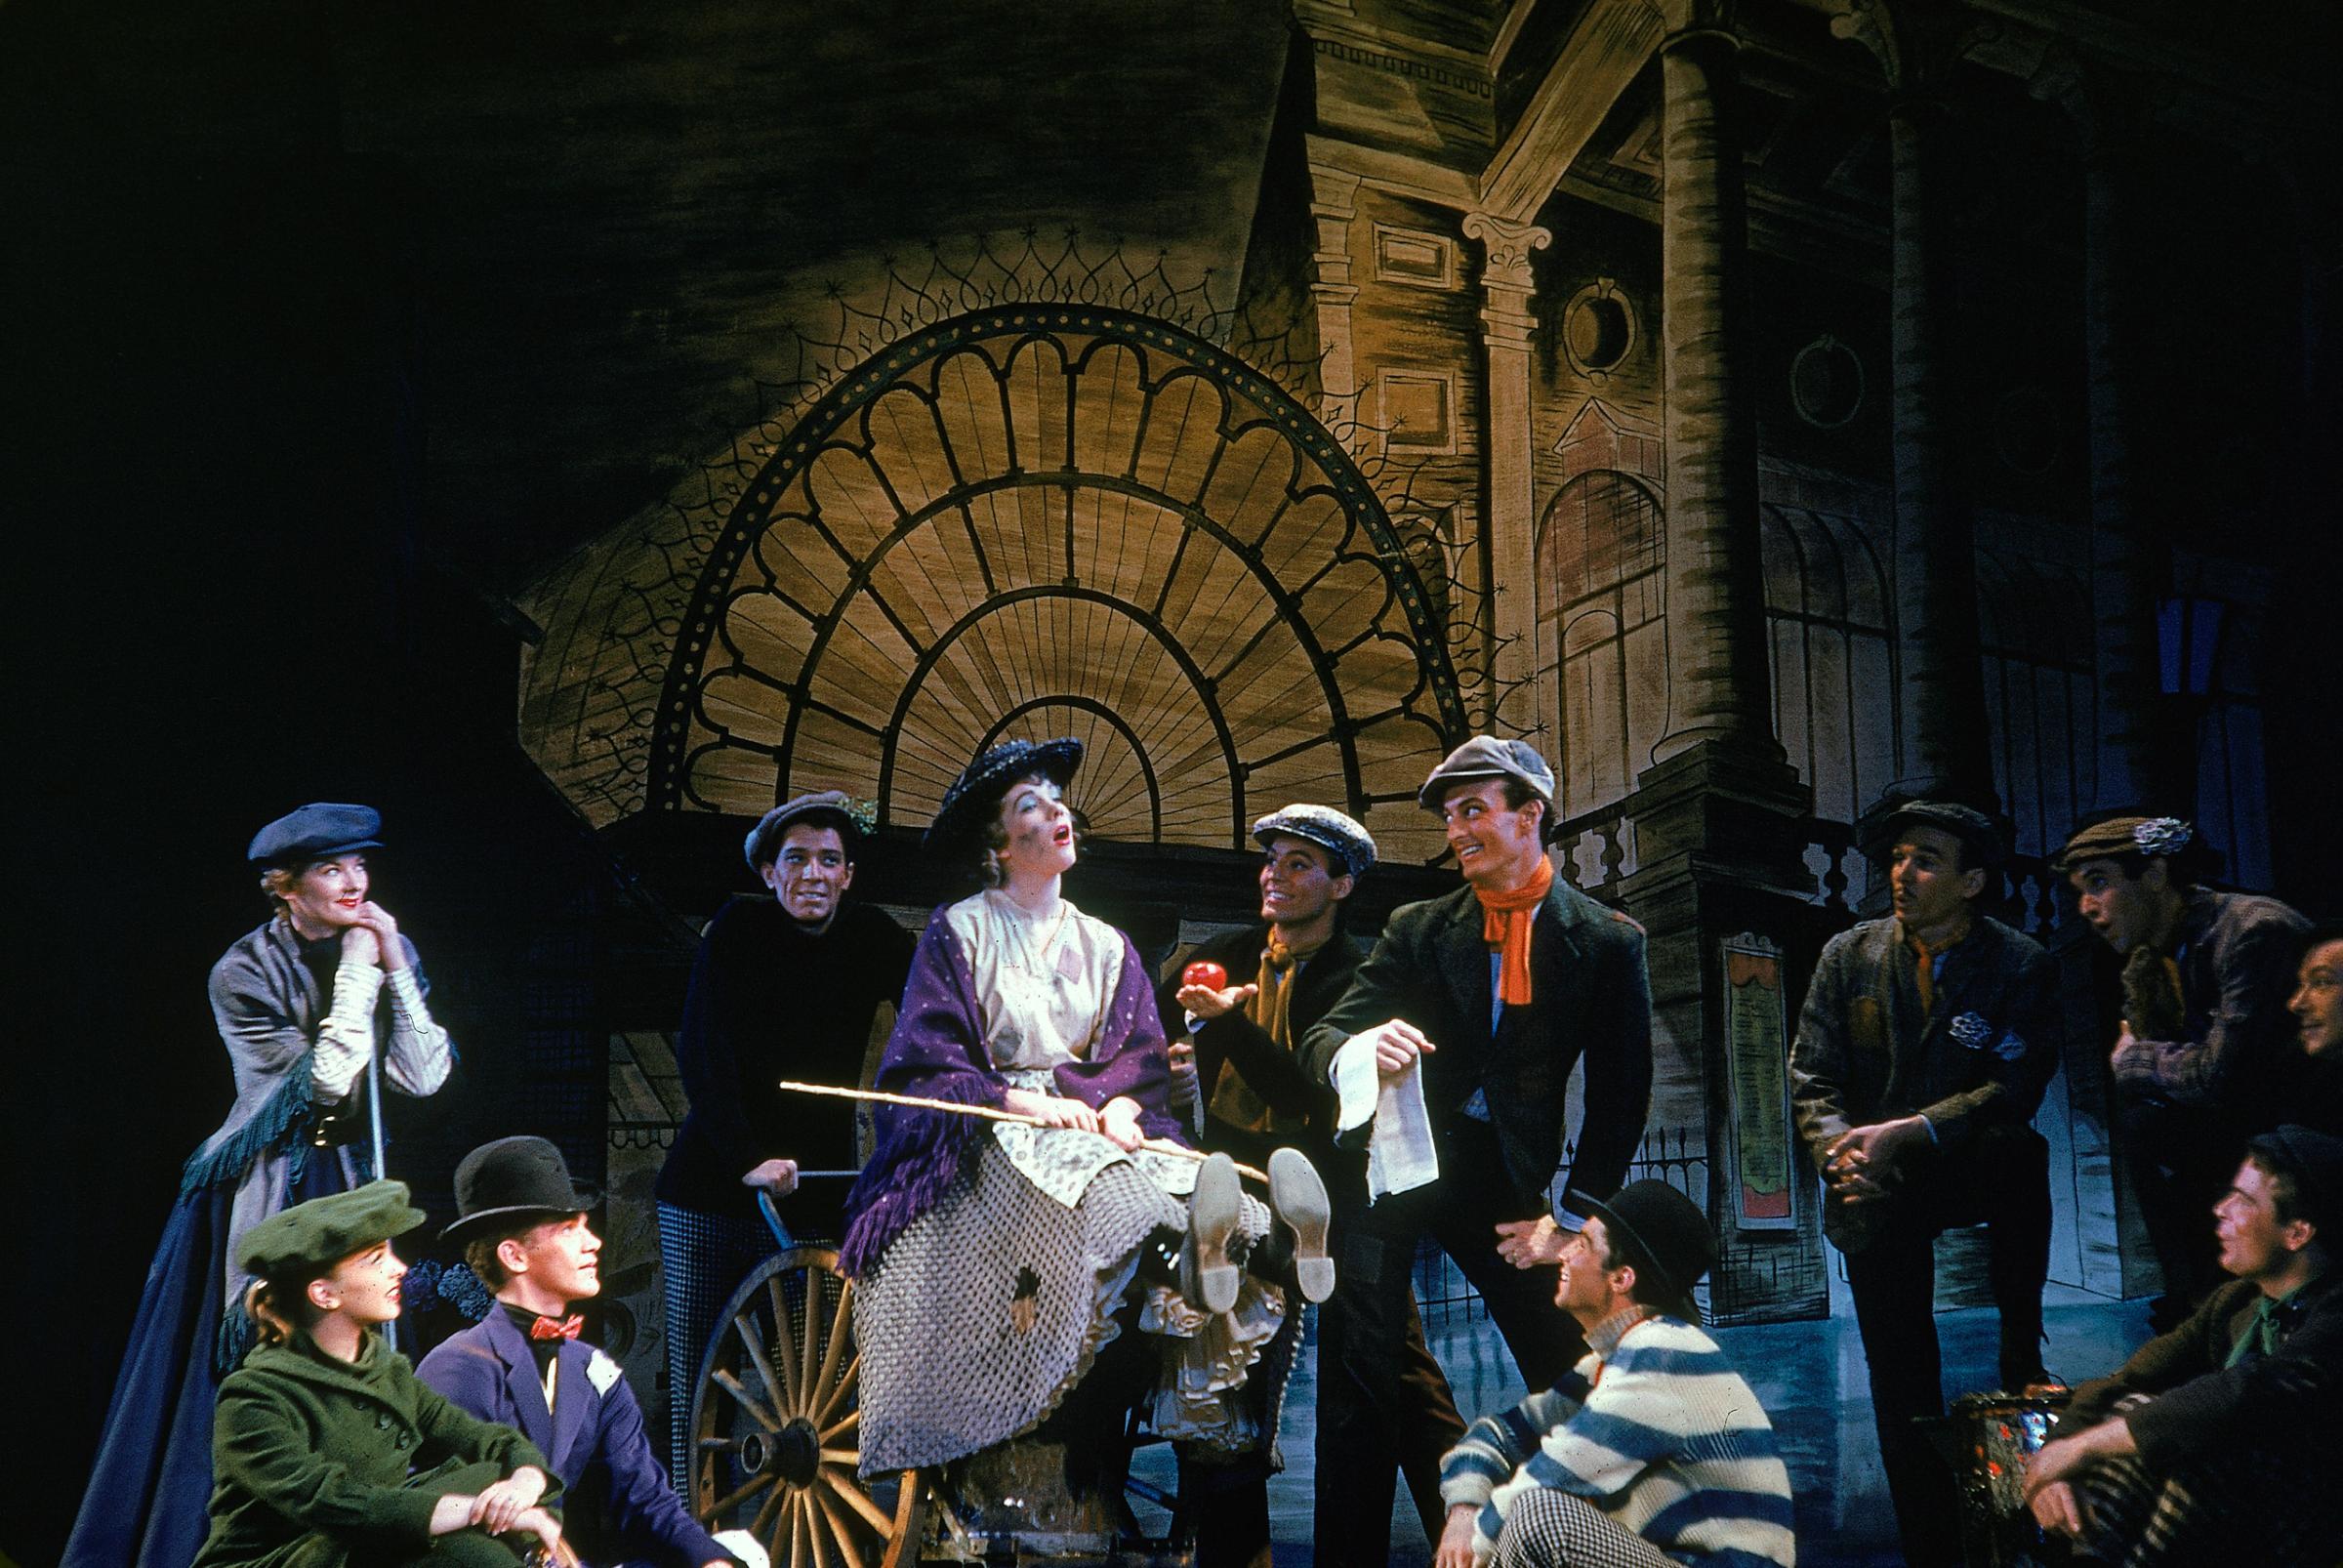 My Fair Lady theater production starring Julie Andrews in 1956.